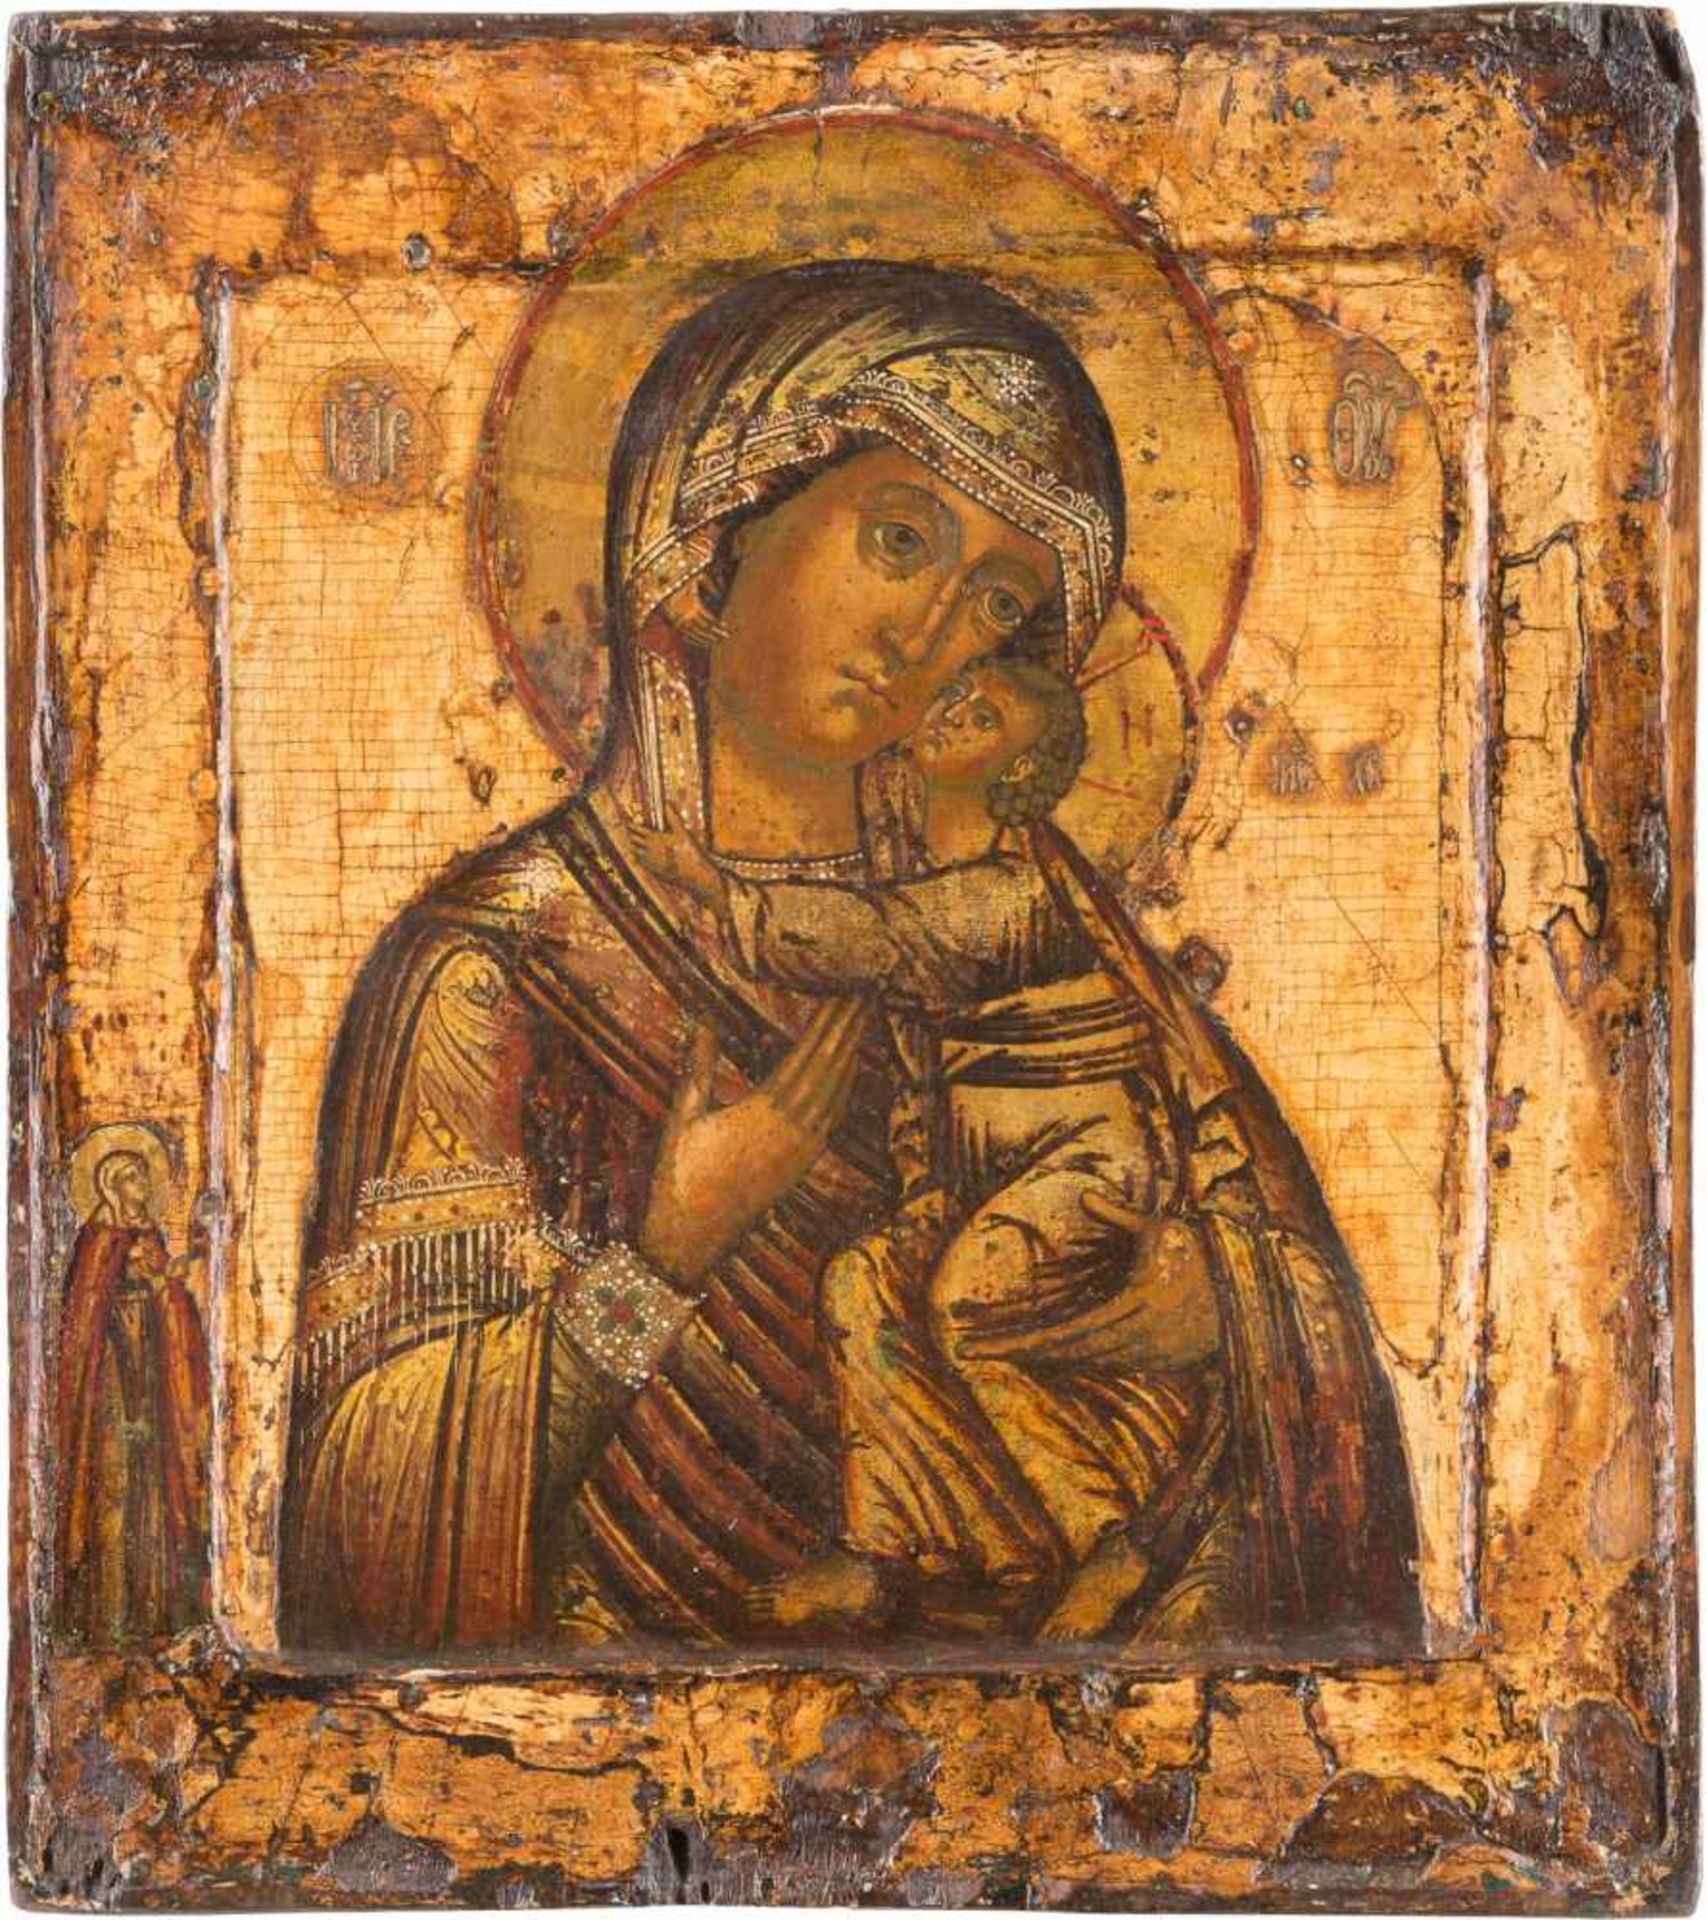 AN ICON SHOWING THE TOLGSKAYA MOTHER OF GOD